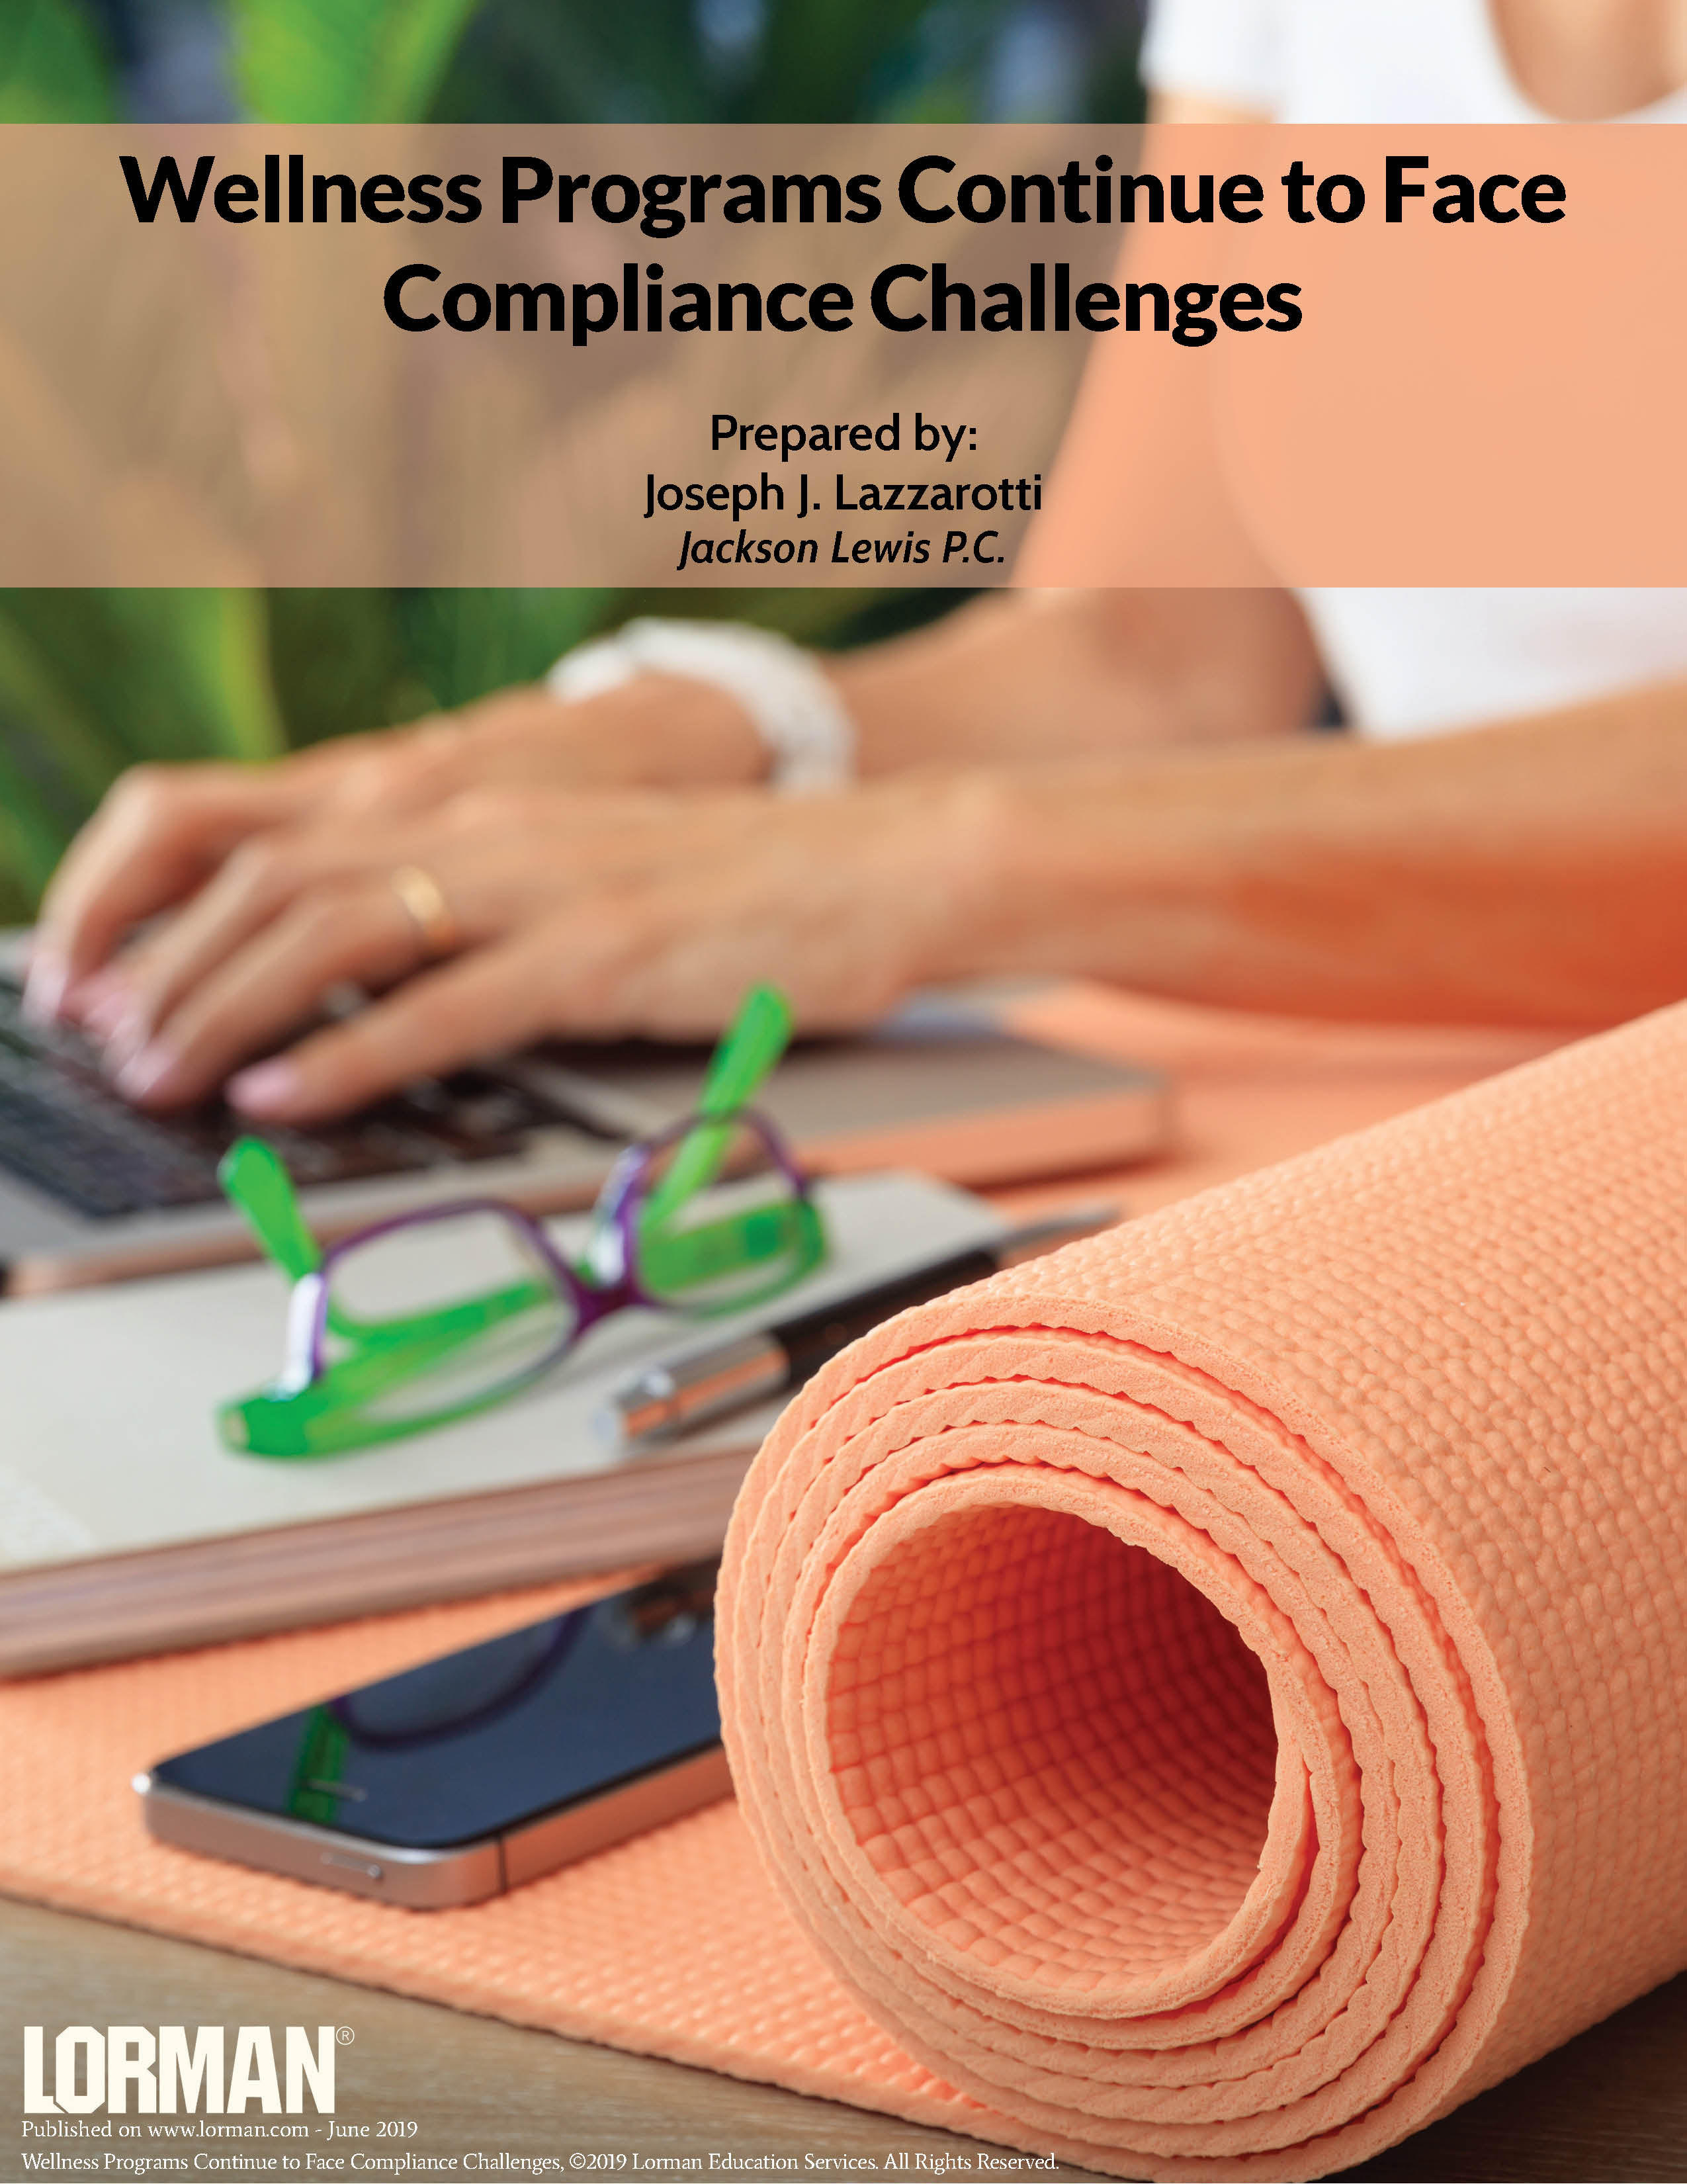 Wellness Programs Continue to Face Compliance Challenges